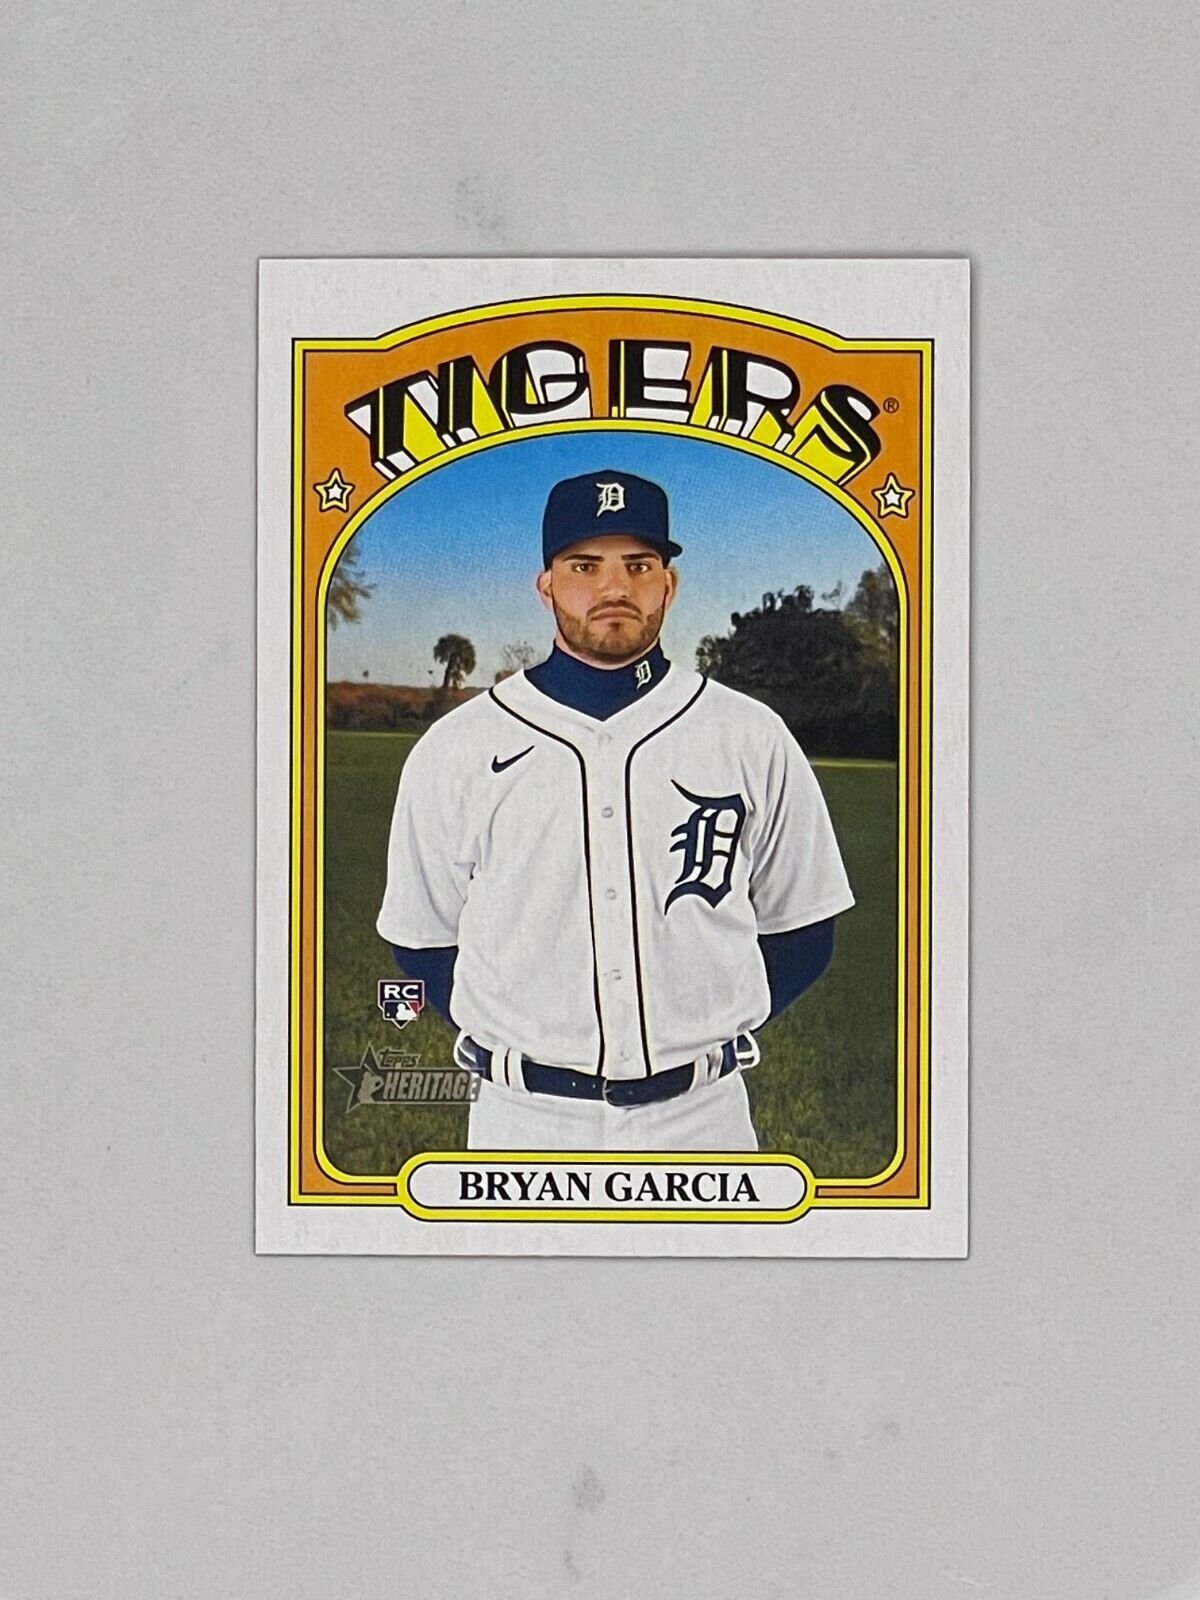 2021 Topps Heritage #642 Bryan Garcia Rookie Card. rookie card picture